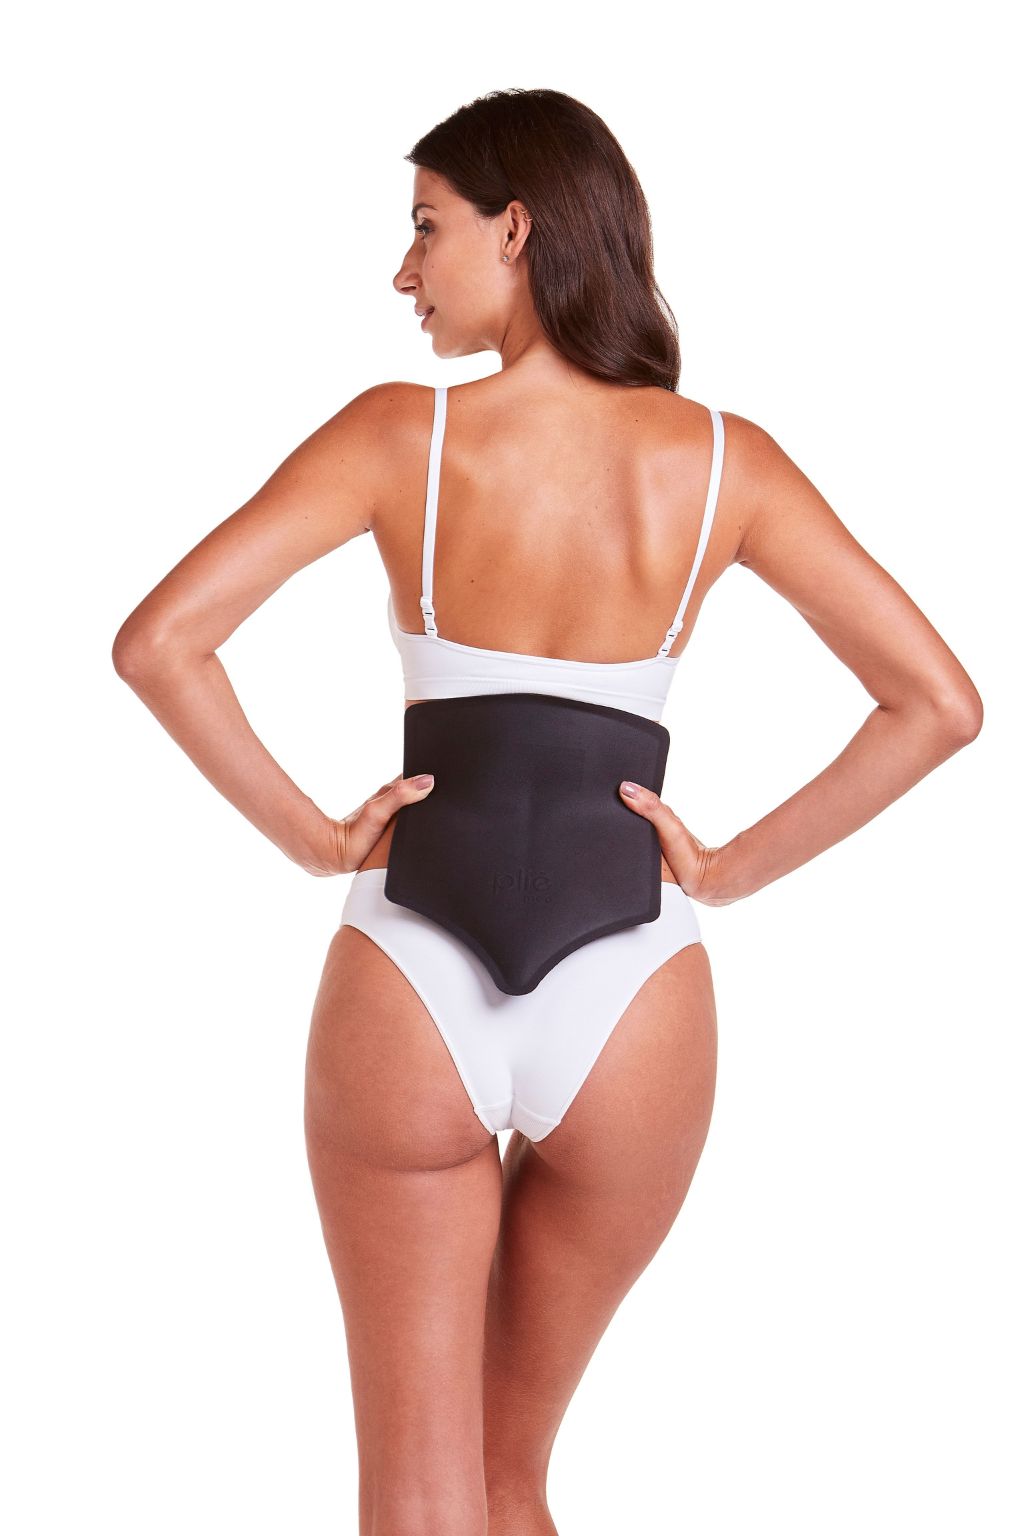 Advanced Unisex Back Support pad for postoperative recovery